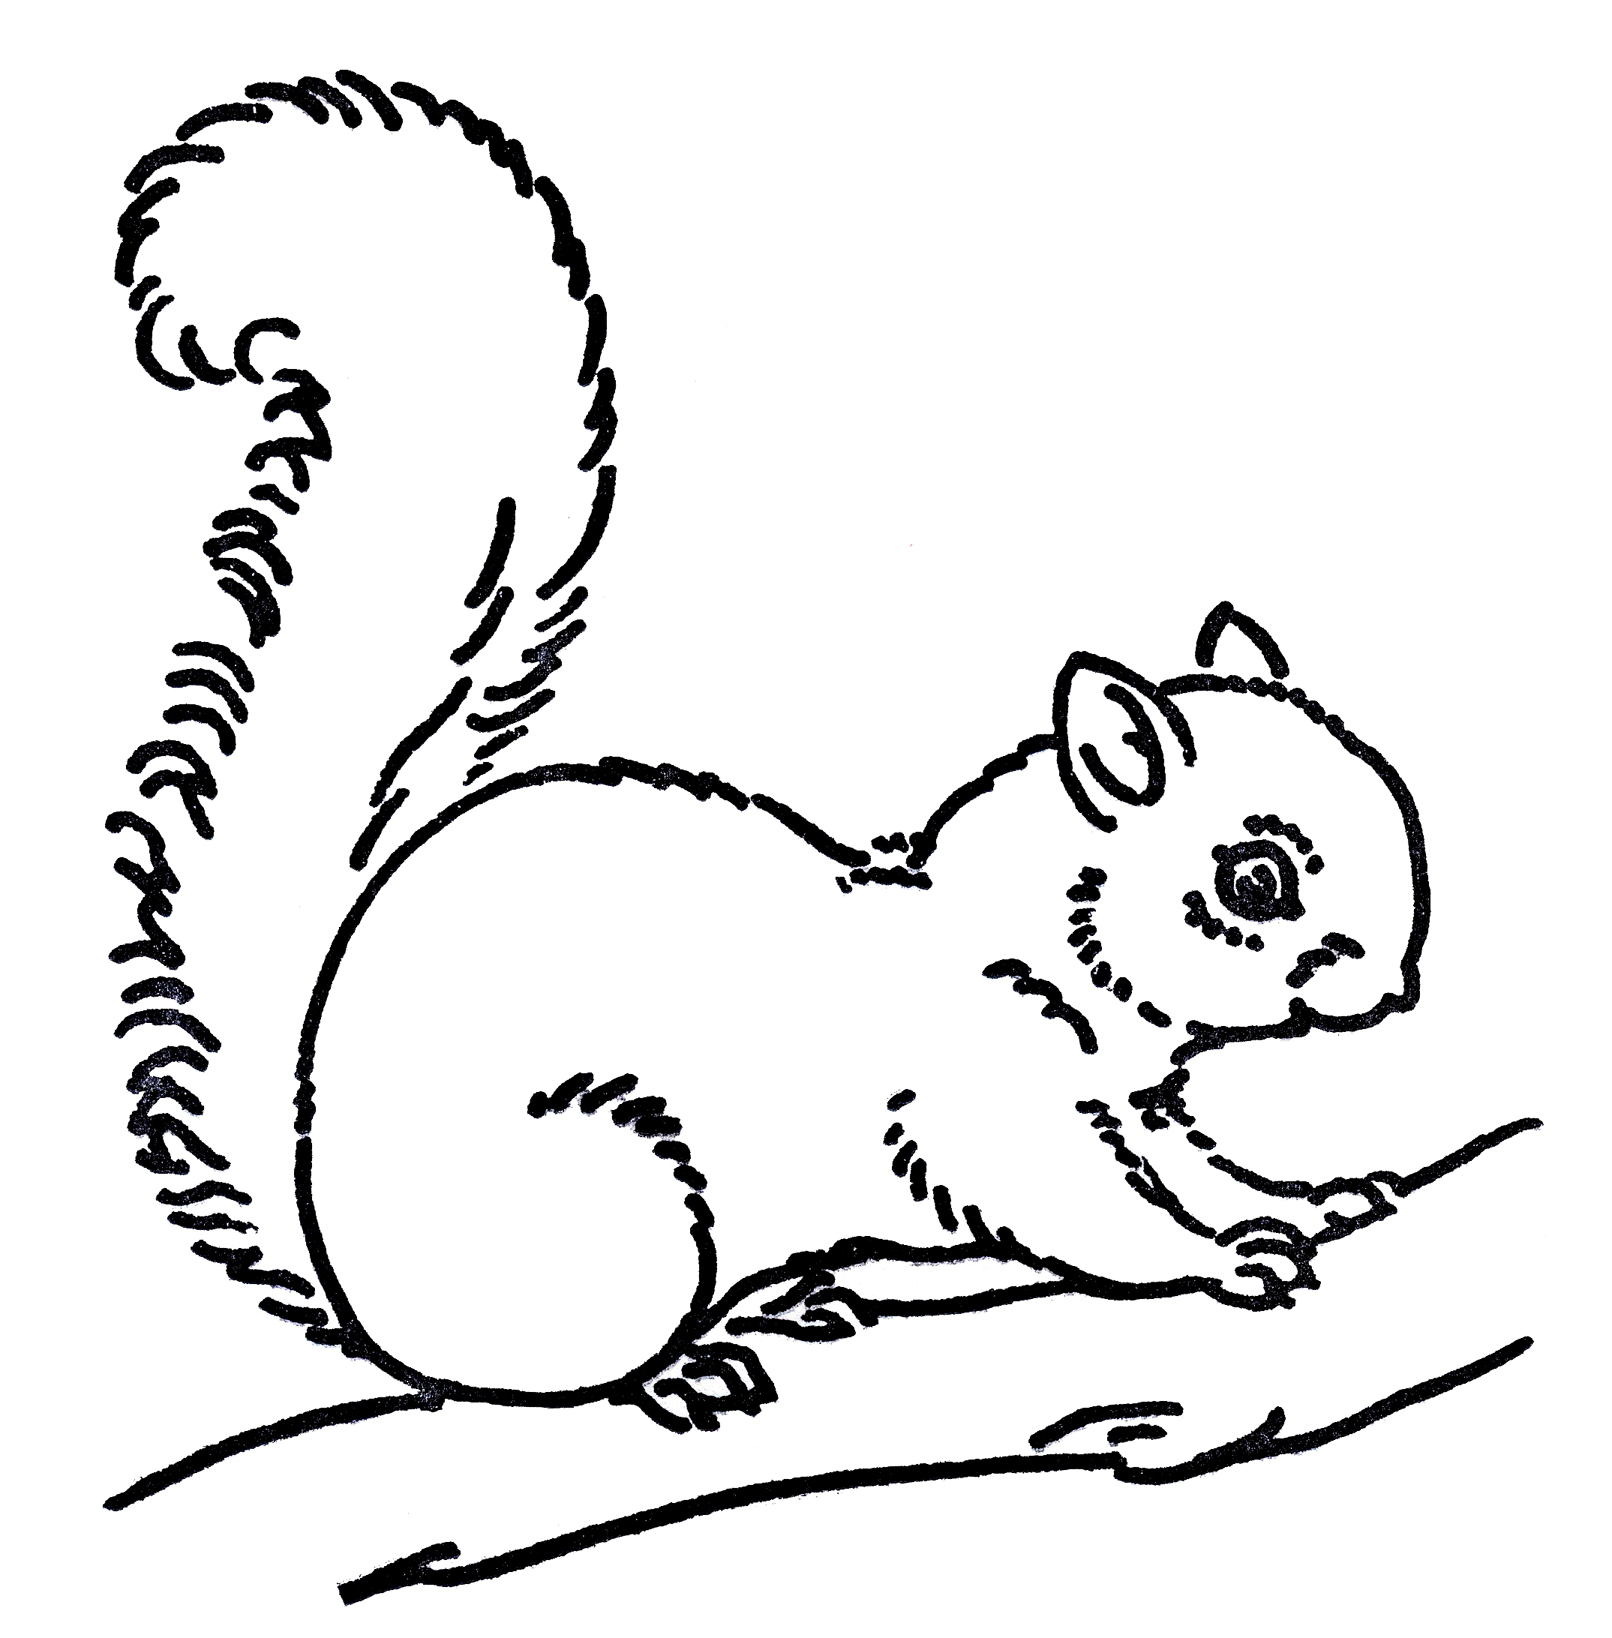 Squirrel Black And White | Clipart Panda - Free Clipart Images